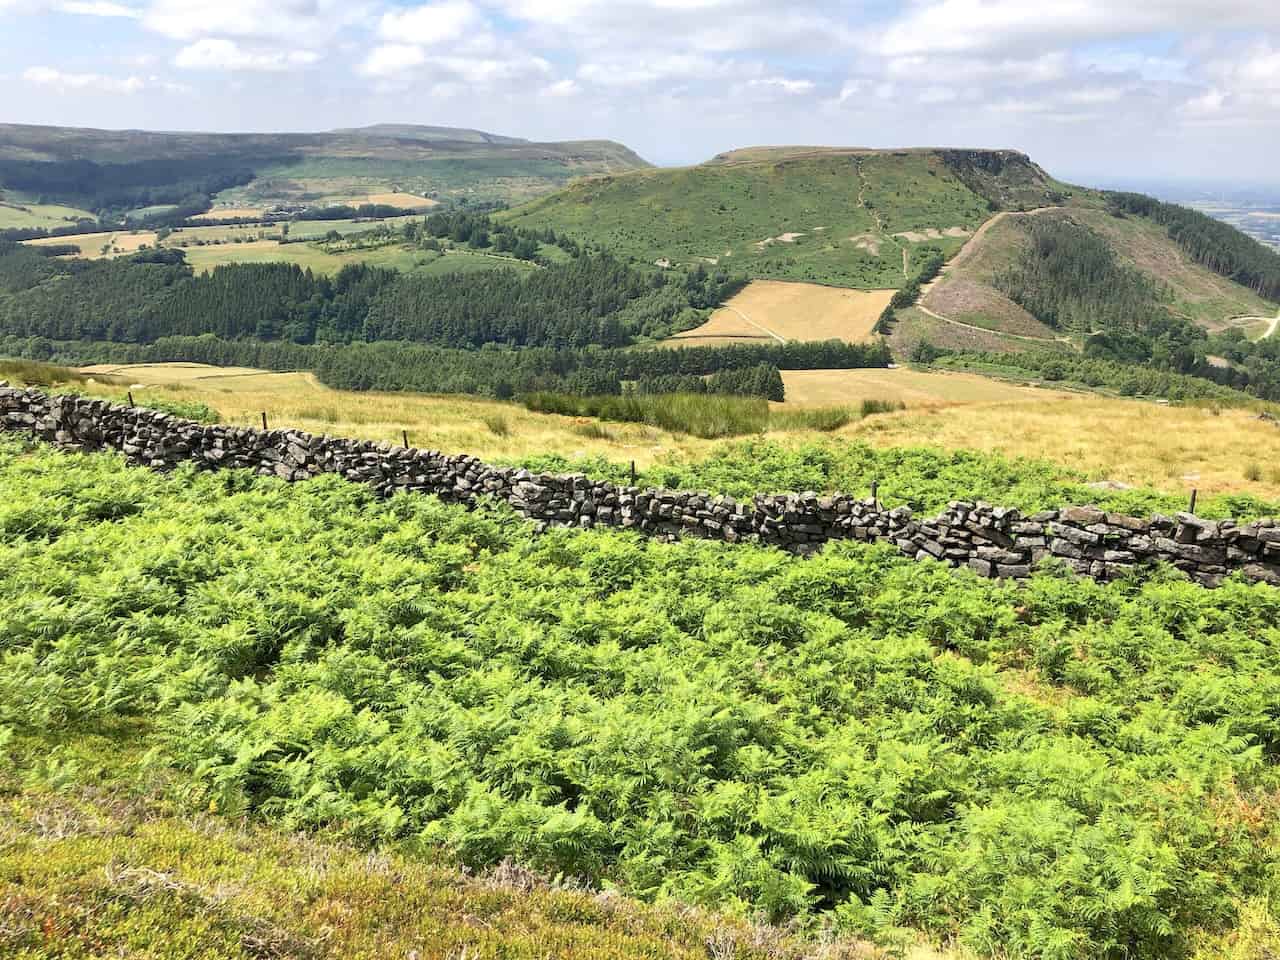 Viewing west, the arrangement of Hasty Bank, Cold Moor, and Cringle Moor unfolds in a stunning display of natural beauty.